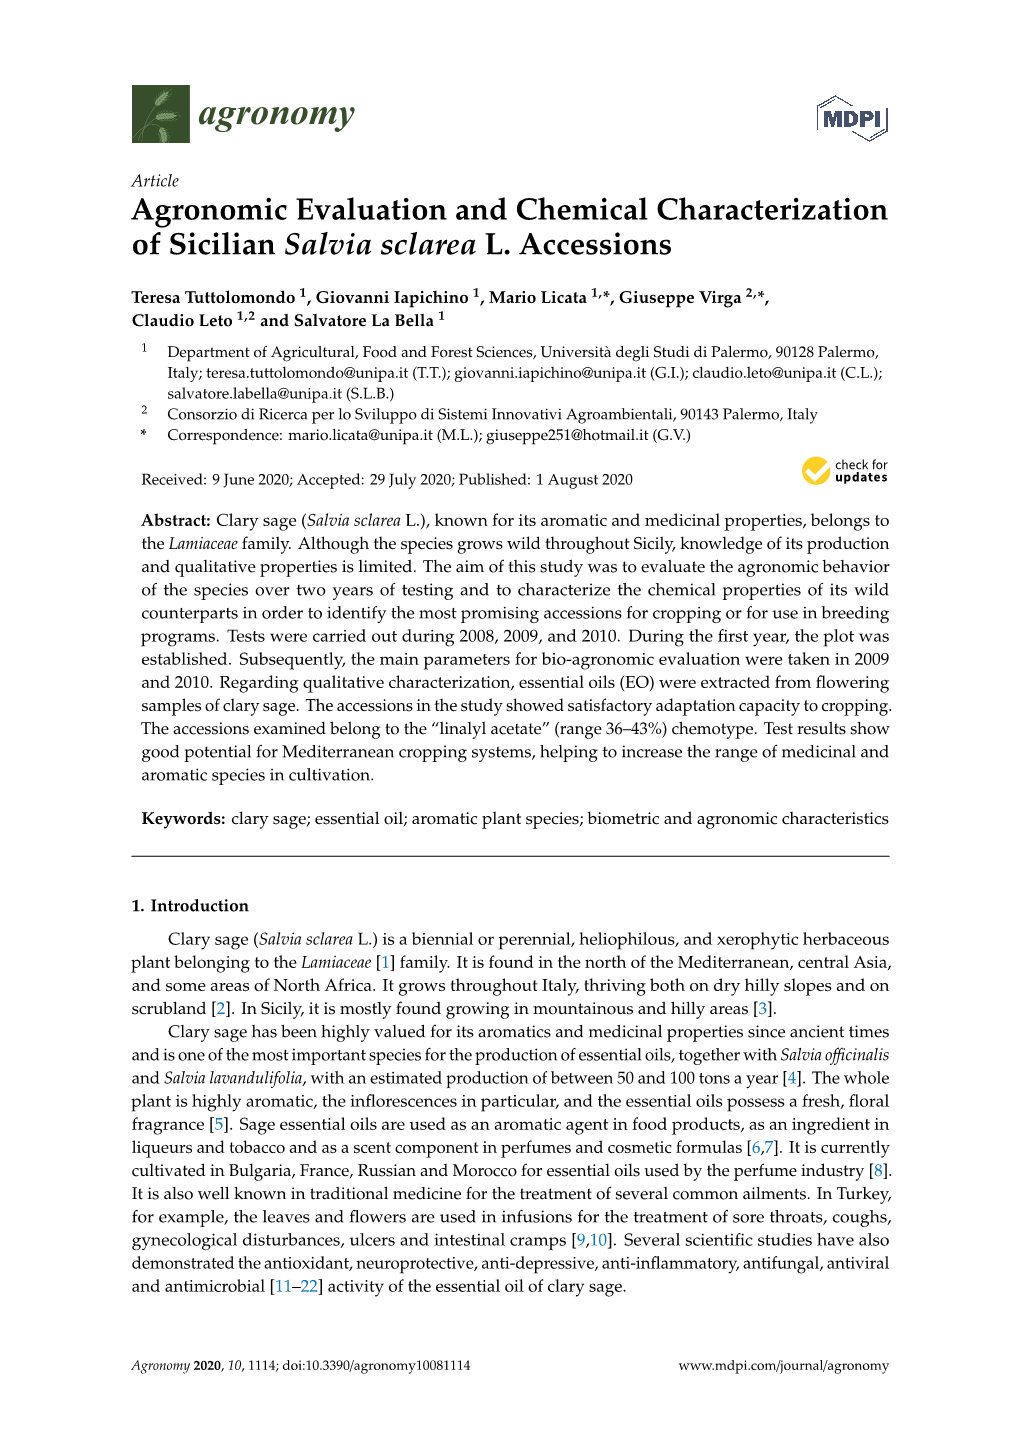 Agronomic Evaluation and Chemical Characterization of Sicilian Salvia Sclarea L